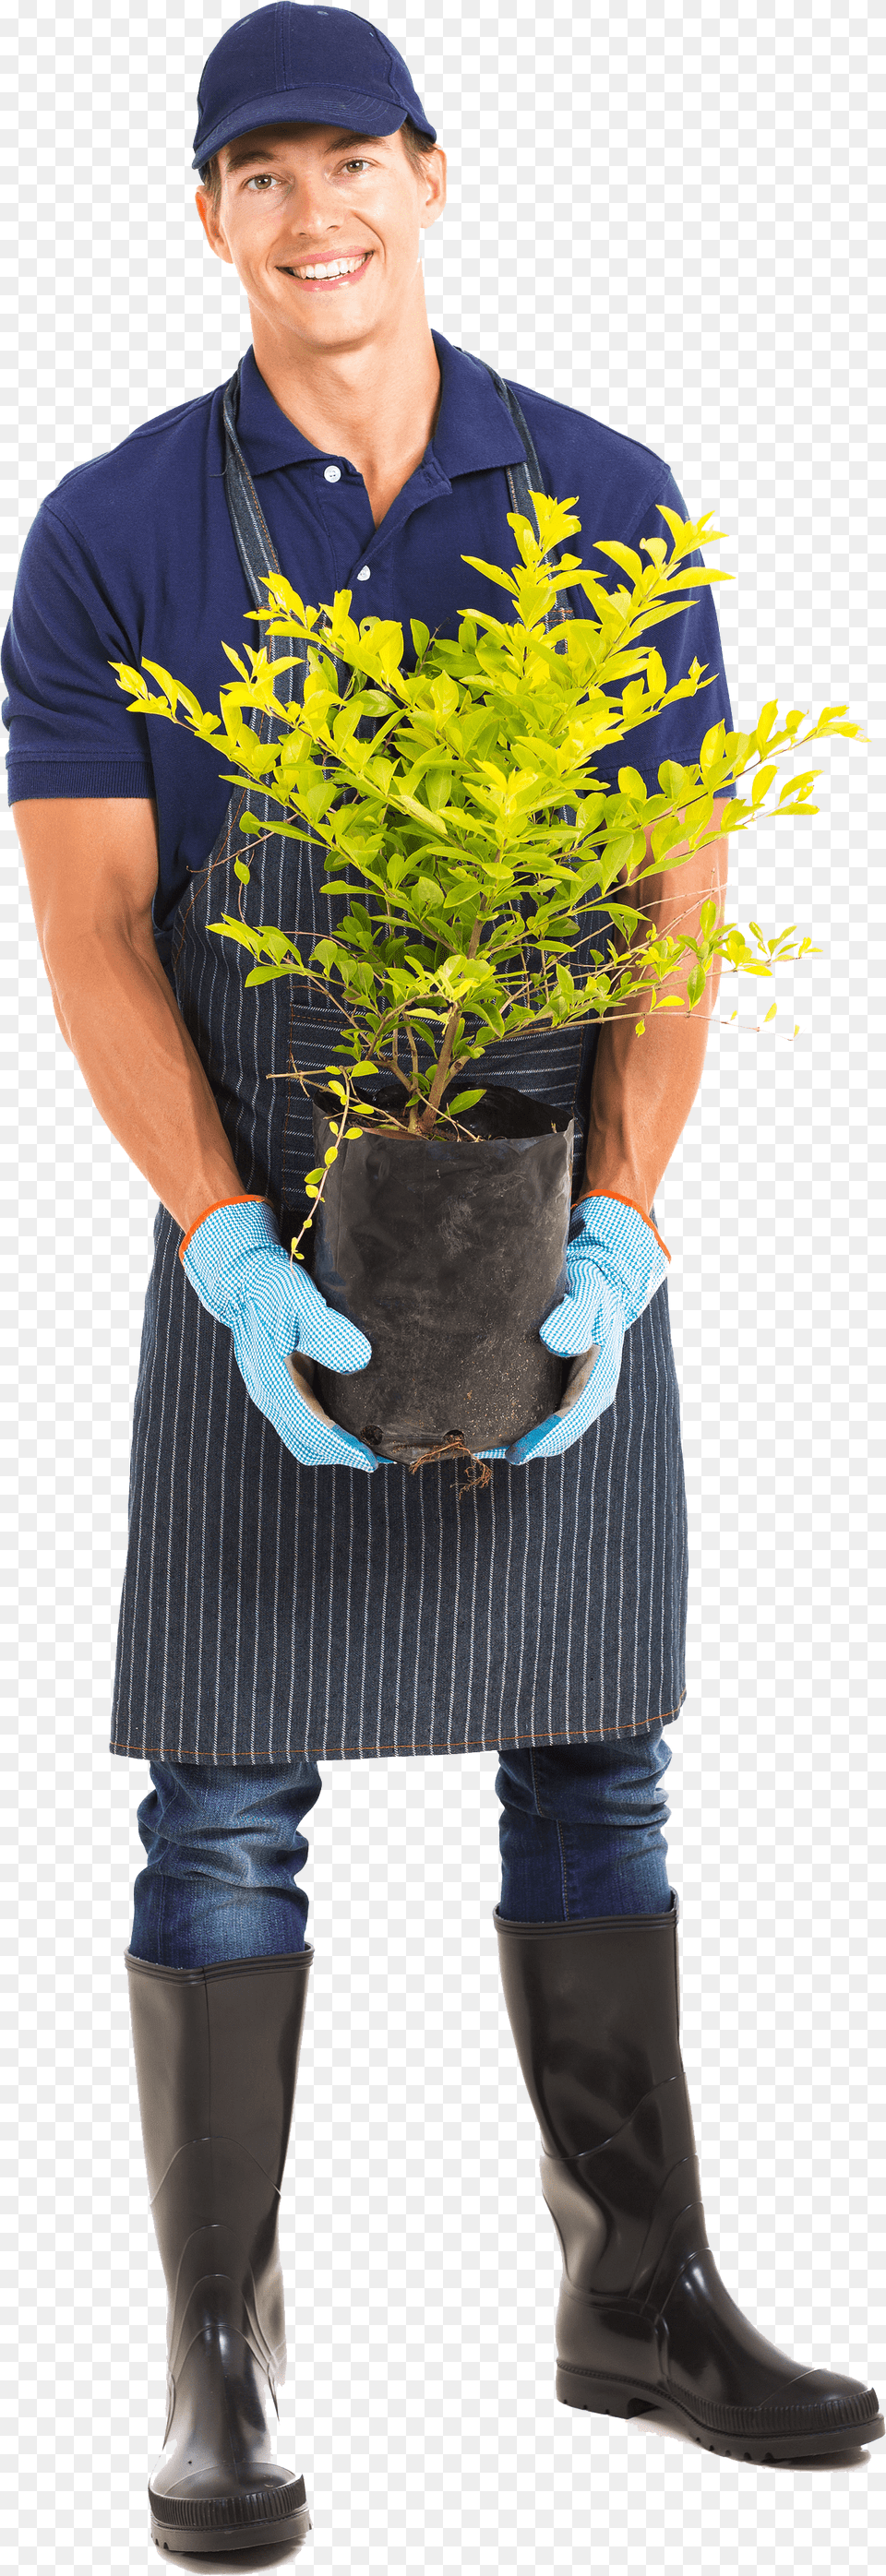 Hd Honest And Dependable Gardener, Nature, Clothing, Outdoors, Garden Free Png Download